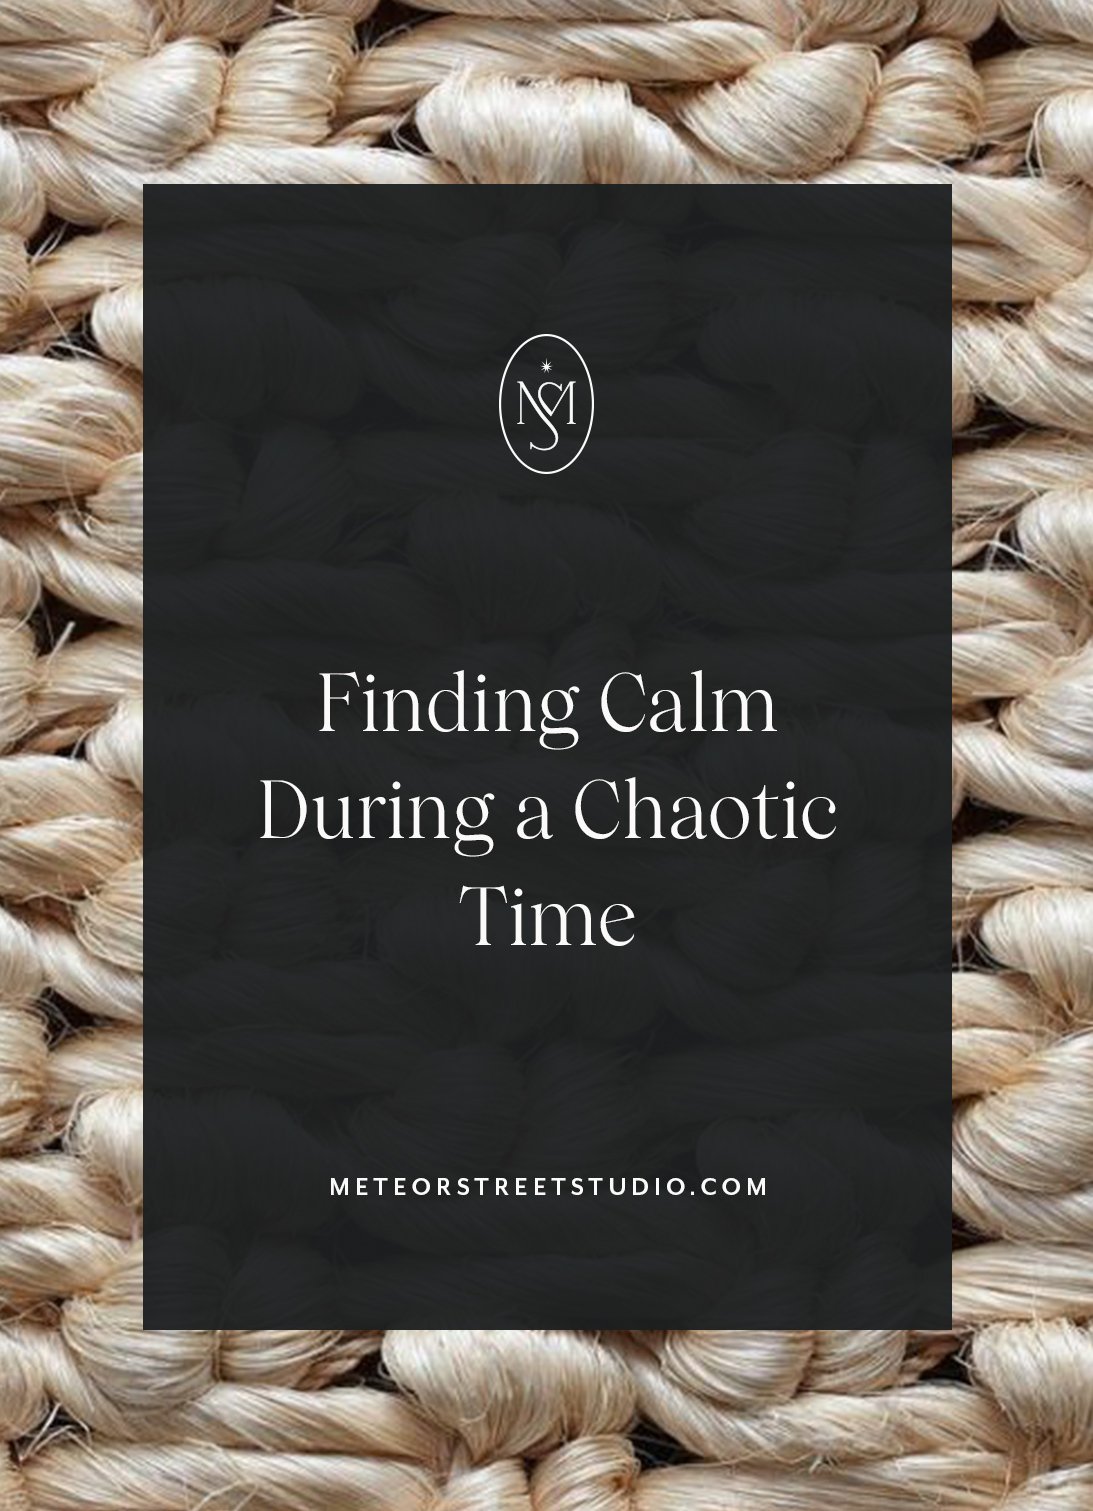 Finding Calm During a Chaotic Time